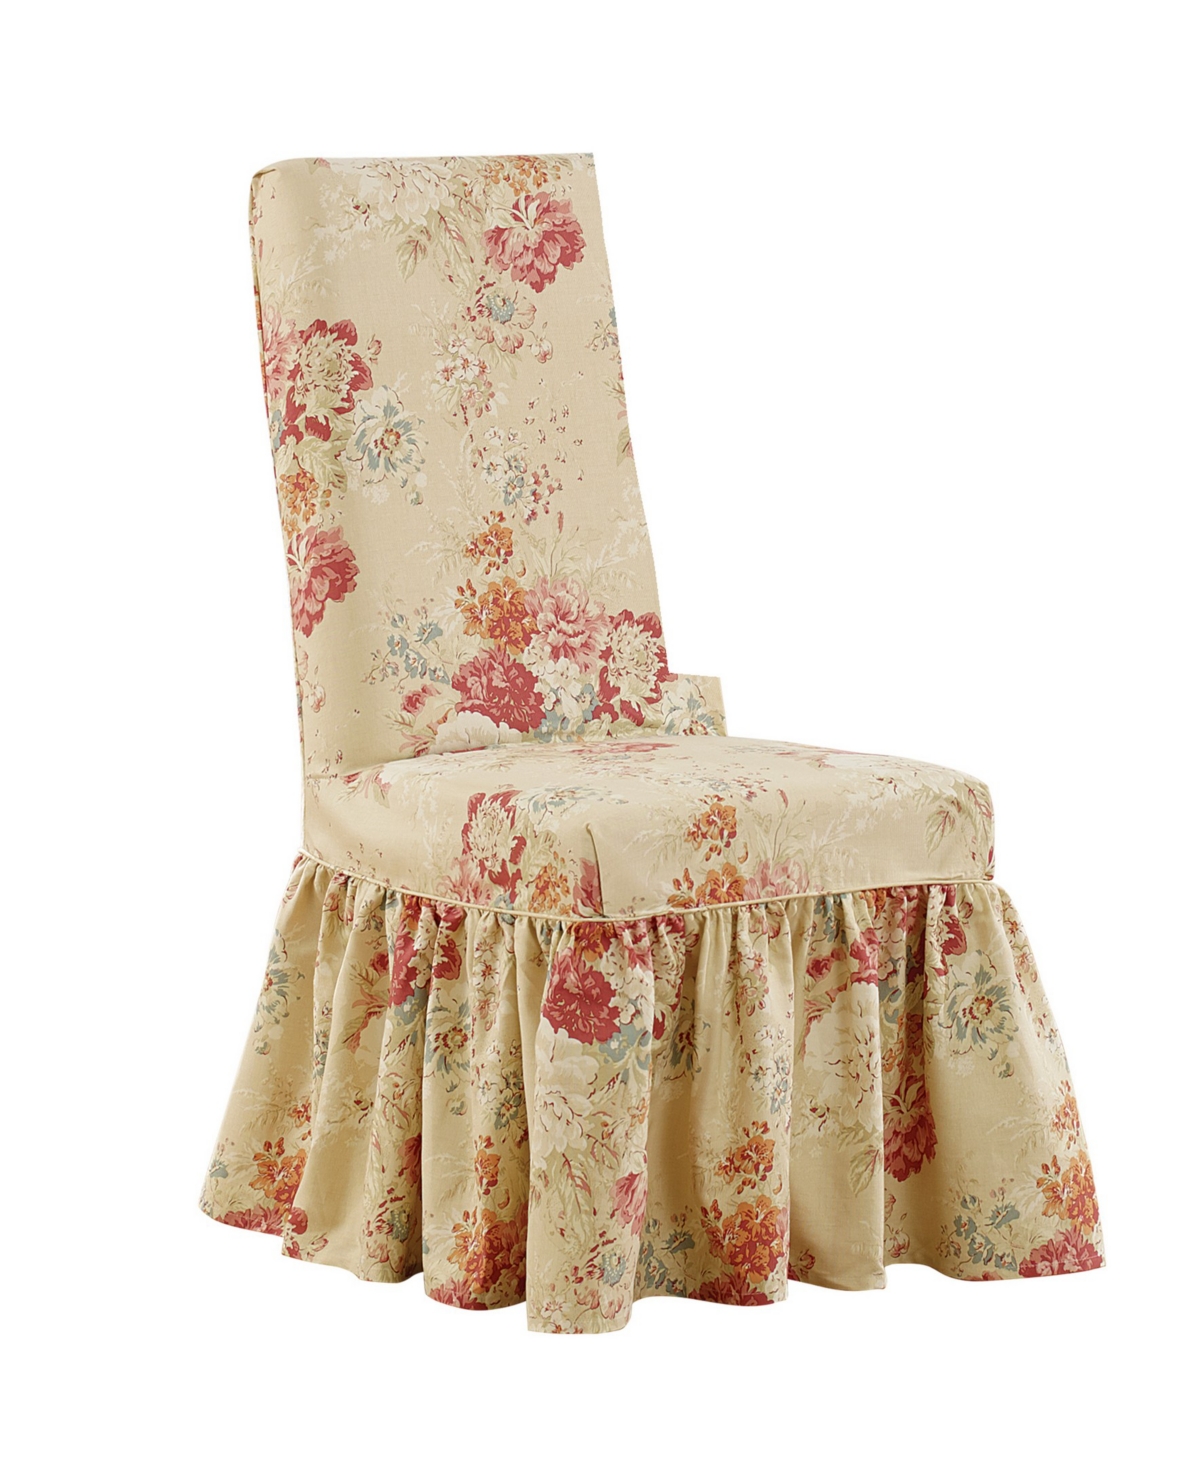 Waverly Ballad Bouquet Long Dining Chair Slipcover, 42" X 19" In Blush